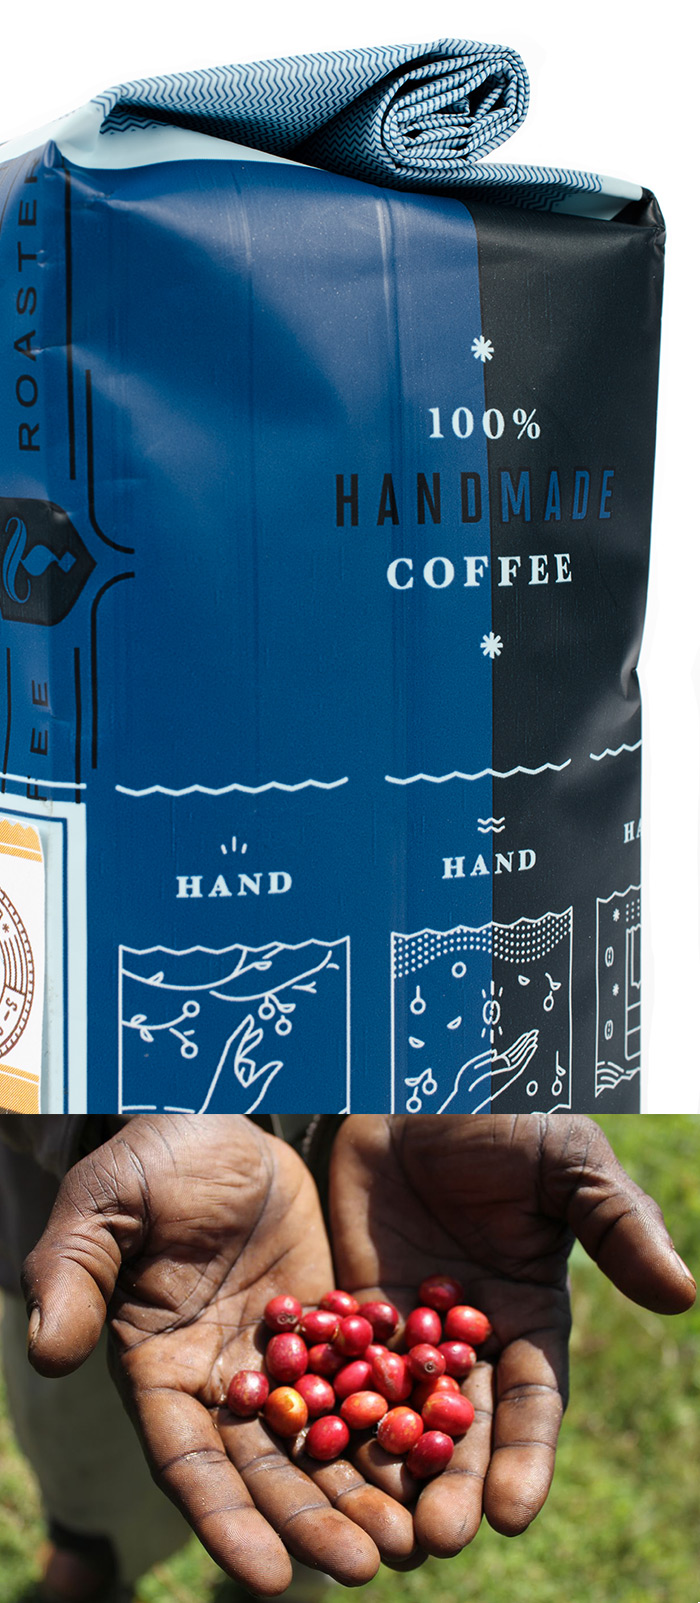 Torch Coffee Roasters packaging and photo of hands with coffee berries